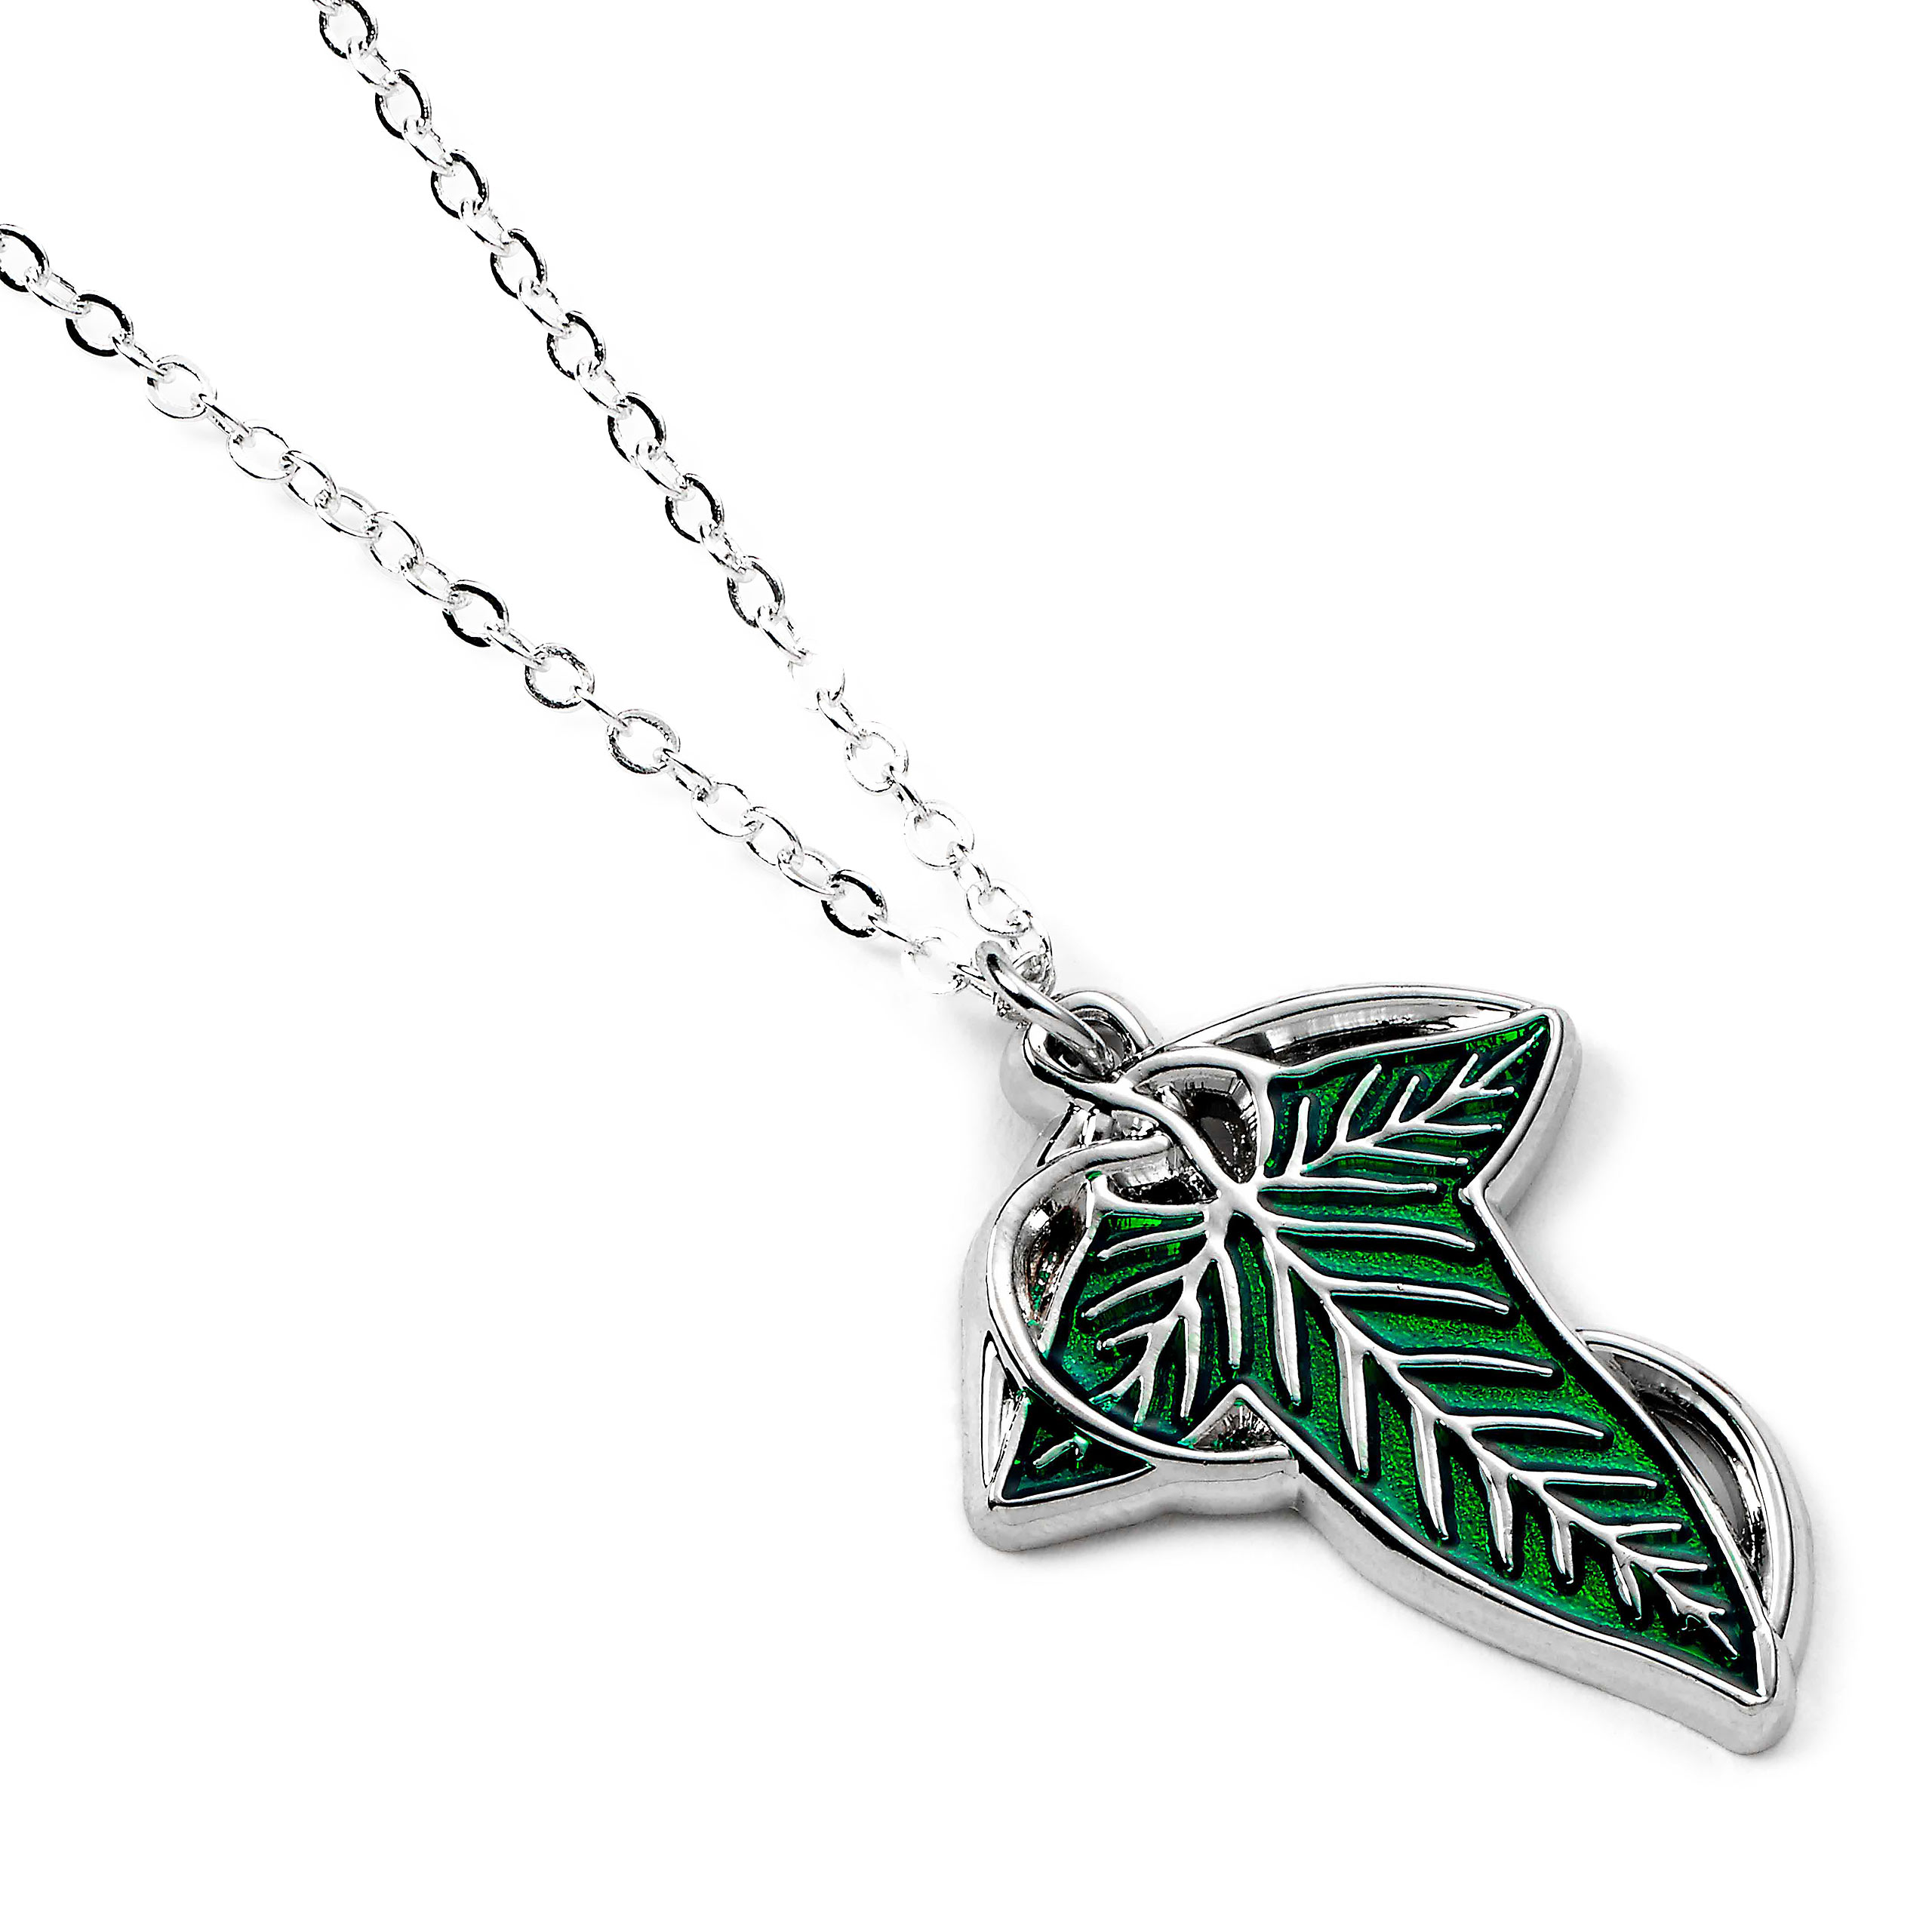 Leaf Brooch Necklace - Lord of the Rings